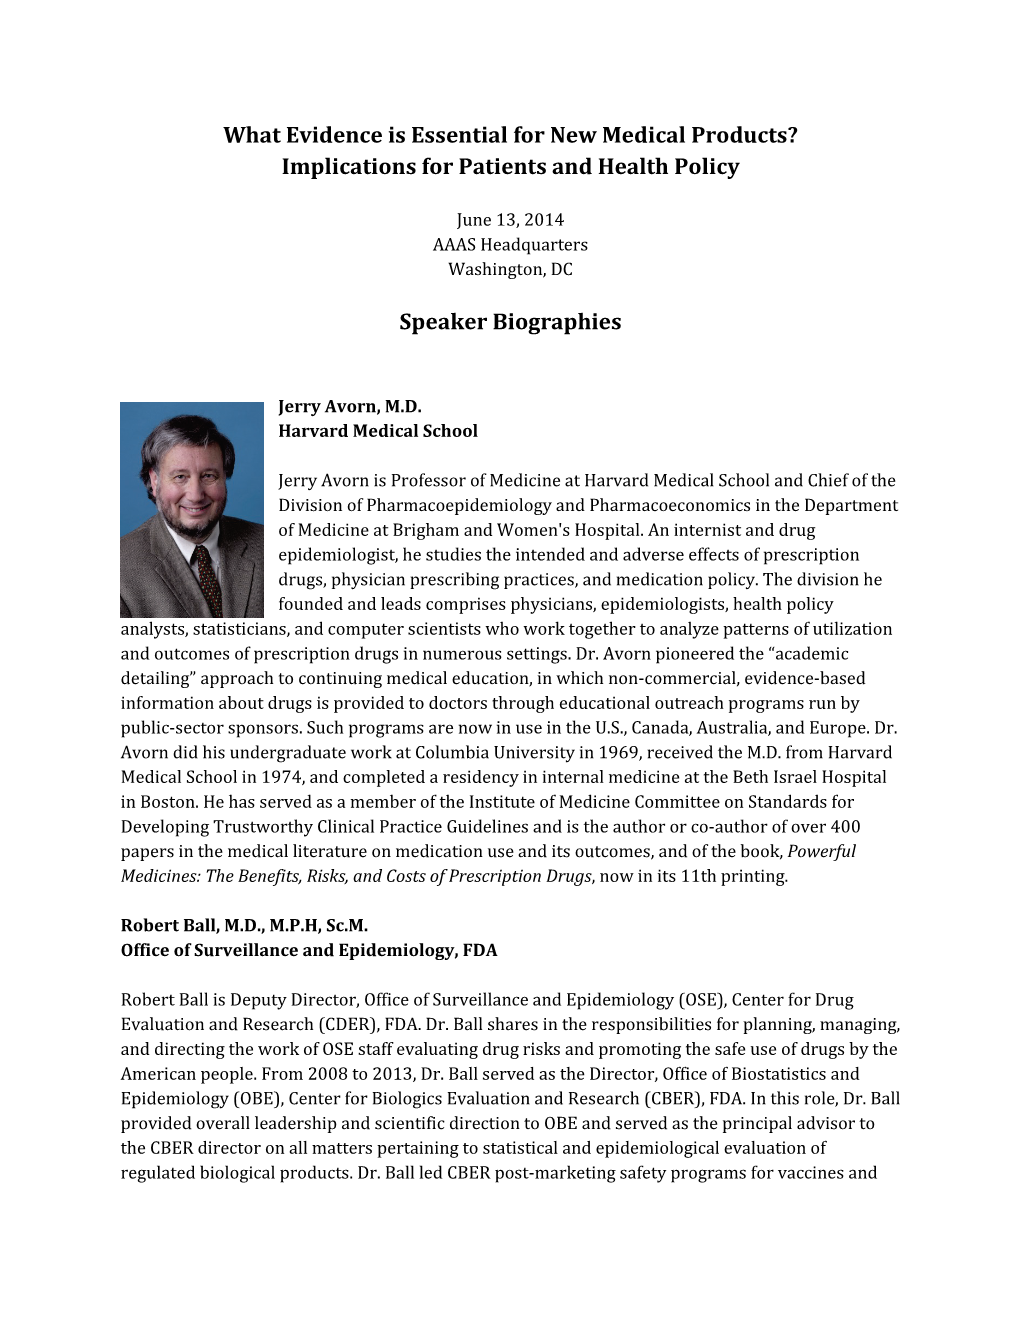 Implications for Patients and Health Policy Speaker Biographies